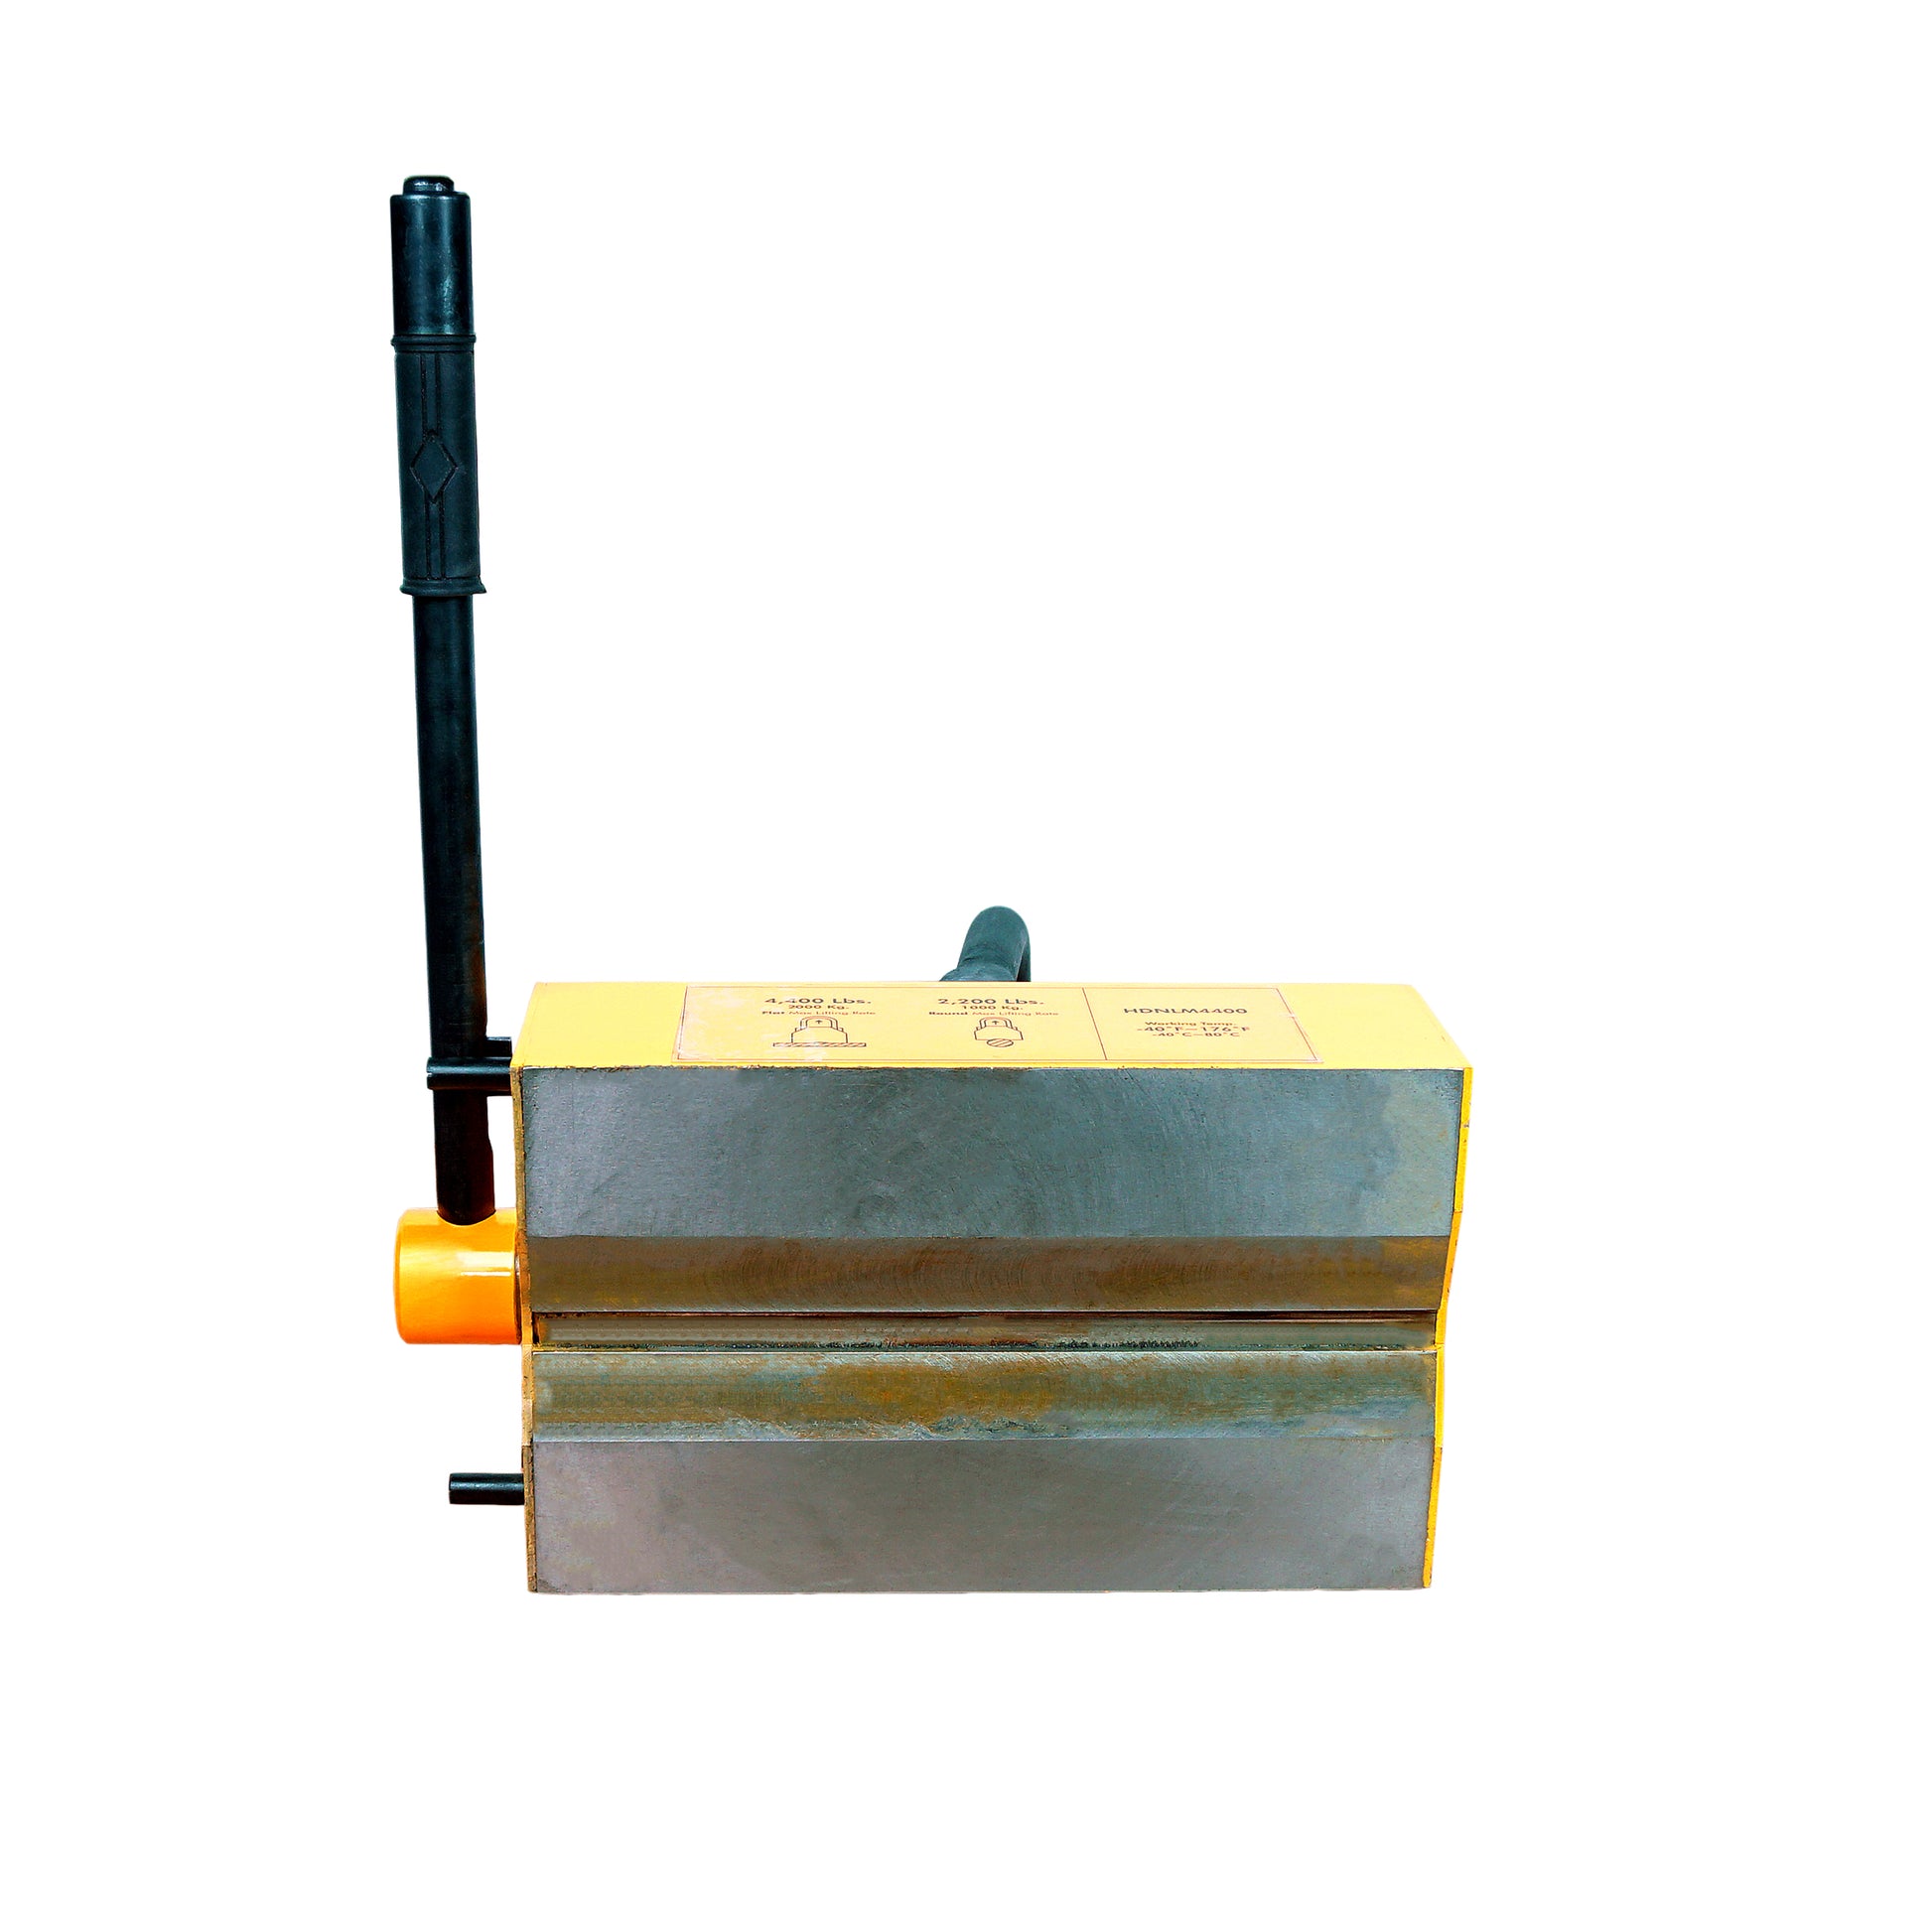 Load image into Gallery viewer, HDNLM4400 Heavy-Duty Neodymium Lifting Magnet - Bottom View